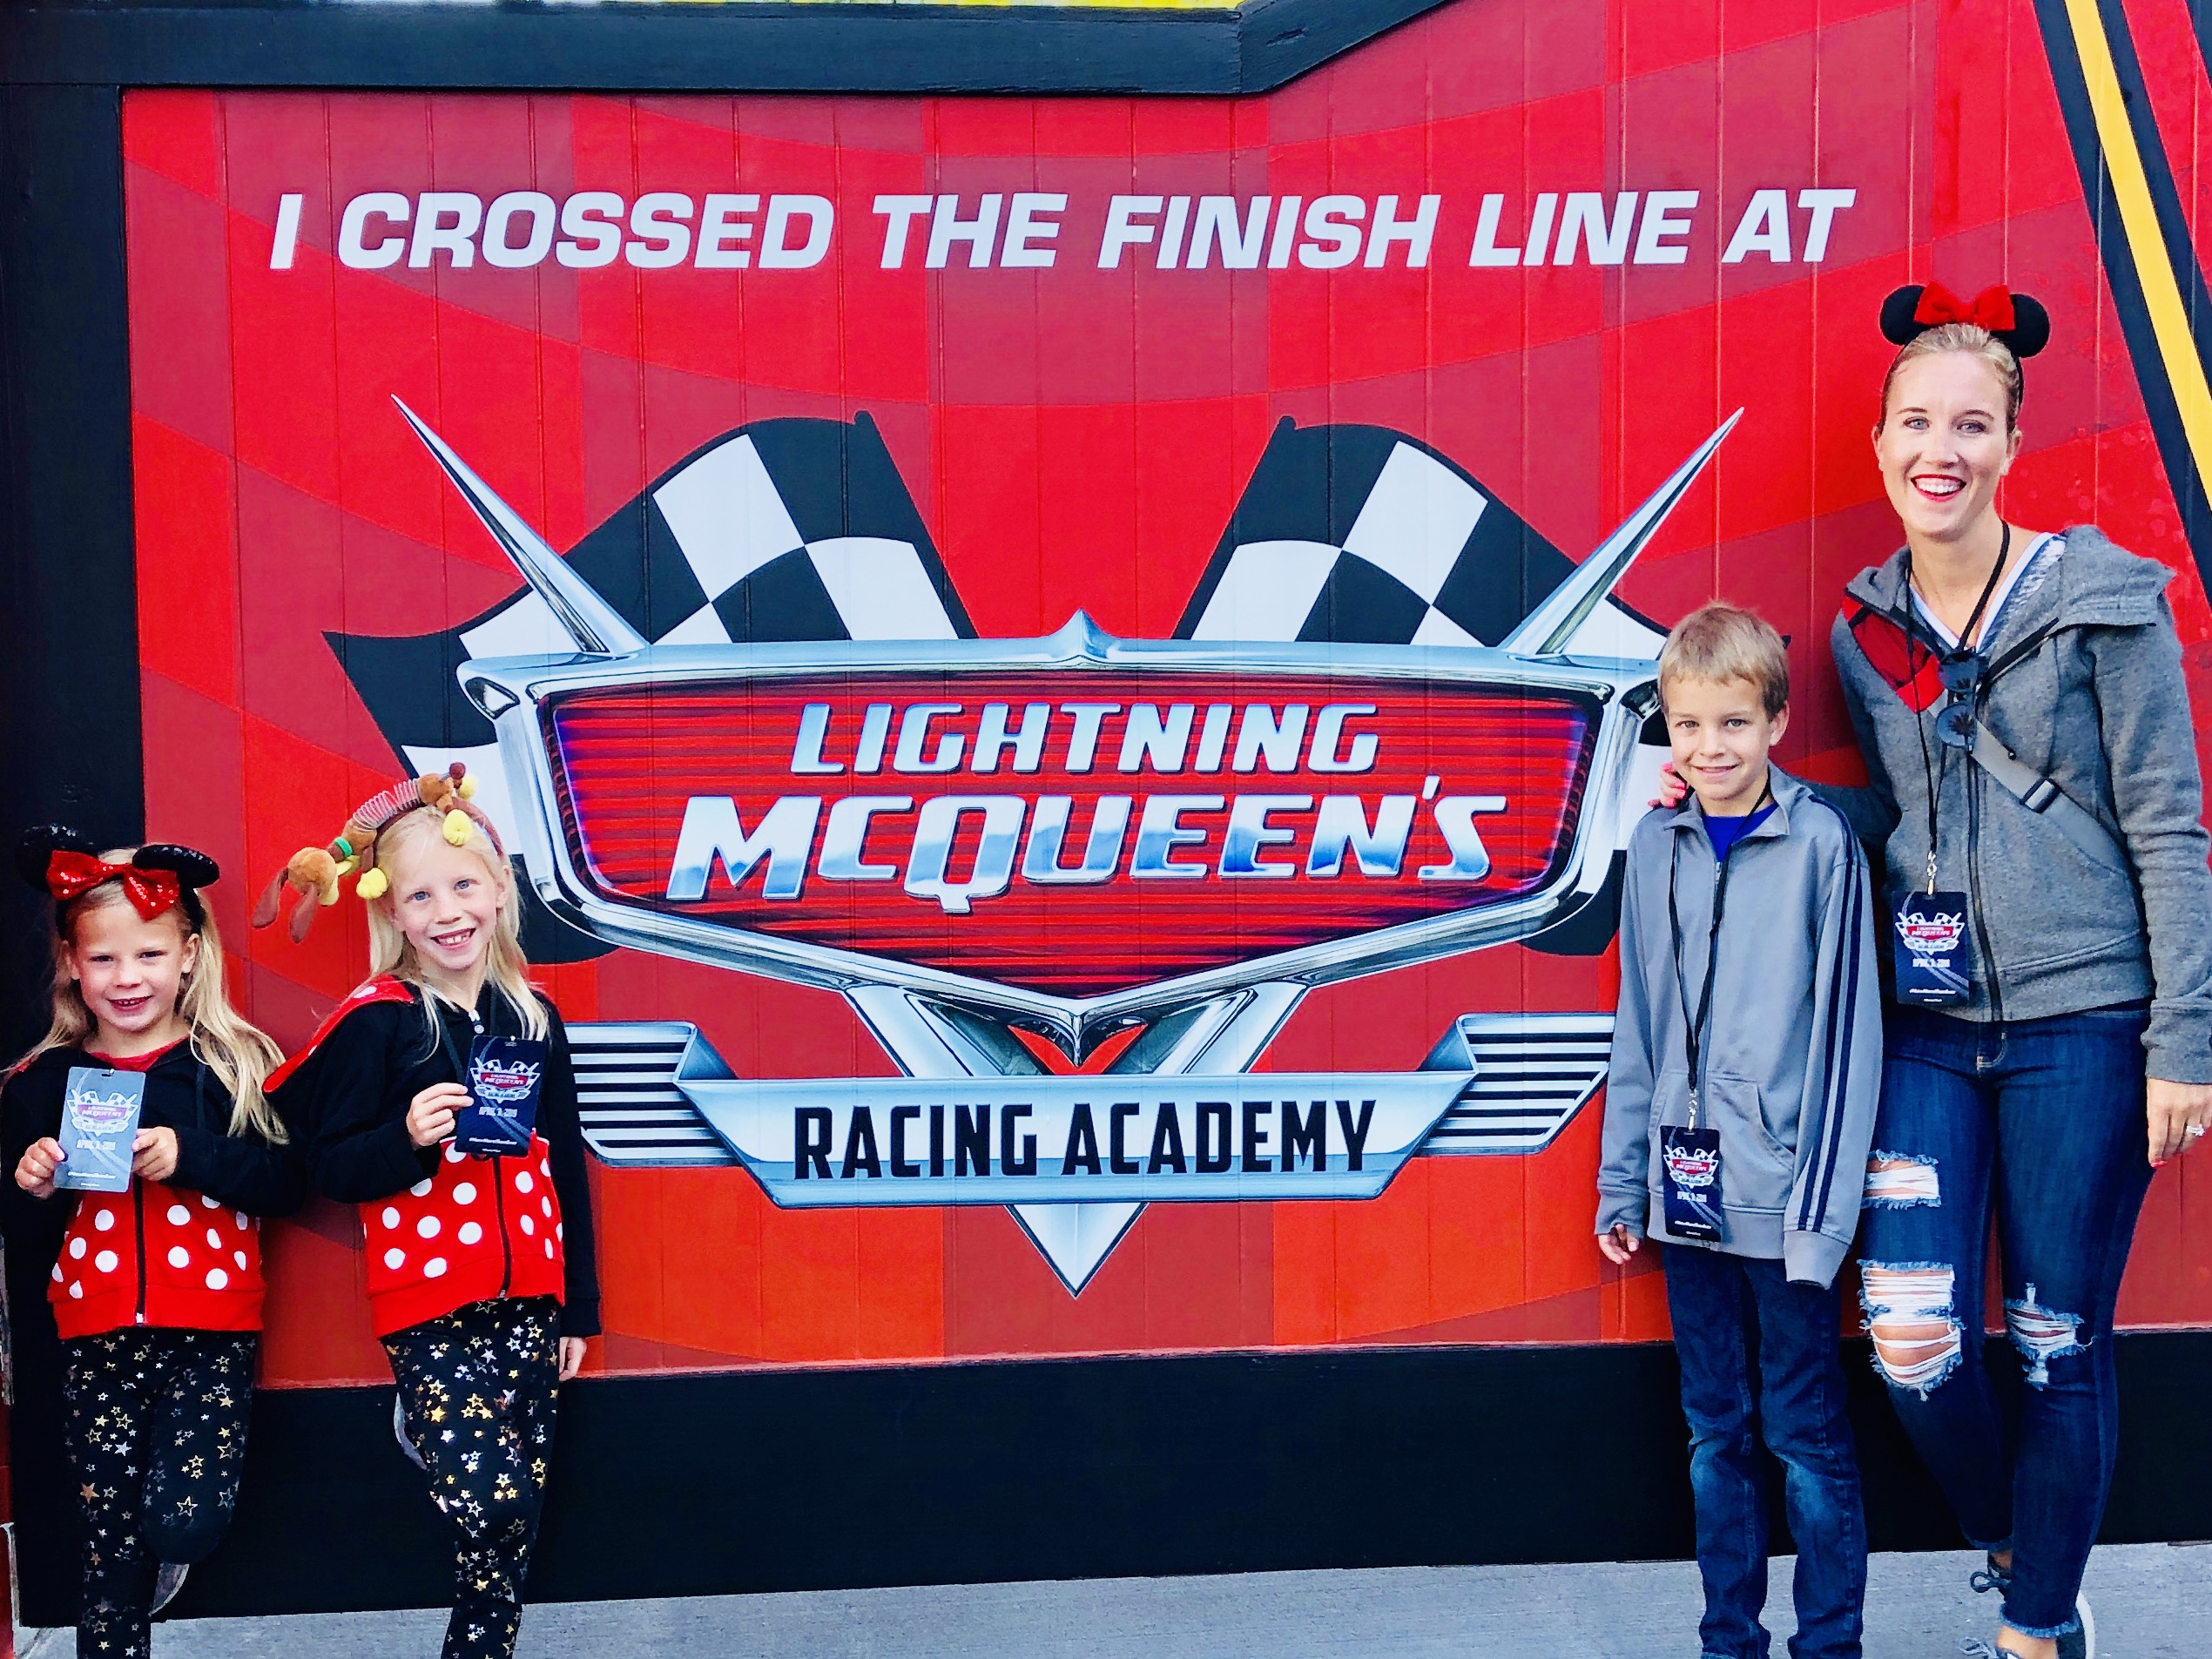 Lightning McQueen's Racing Academy Has Been Closed for Six Days in a Row,  Reopening Date Unknown